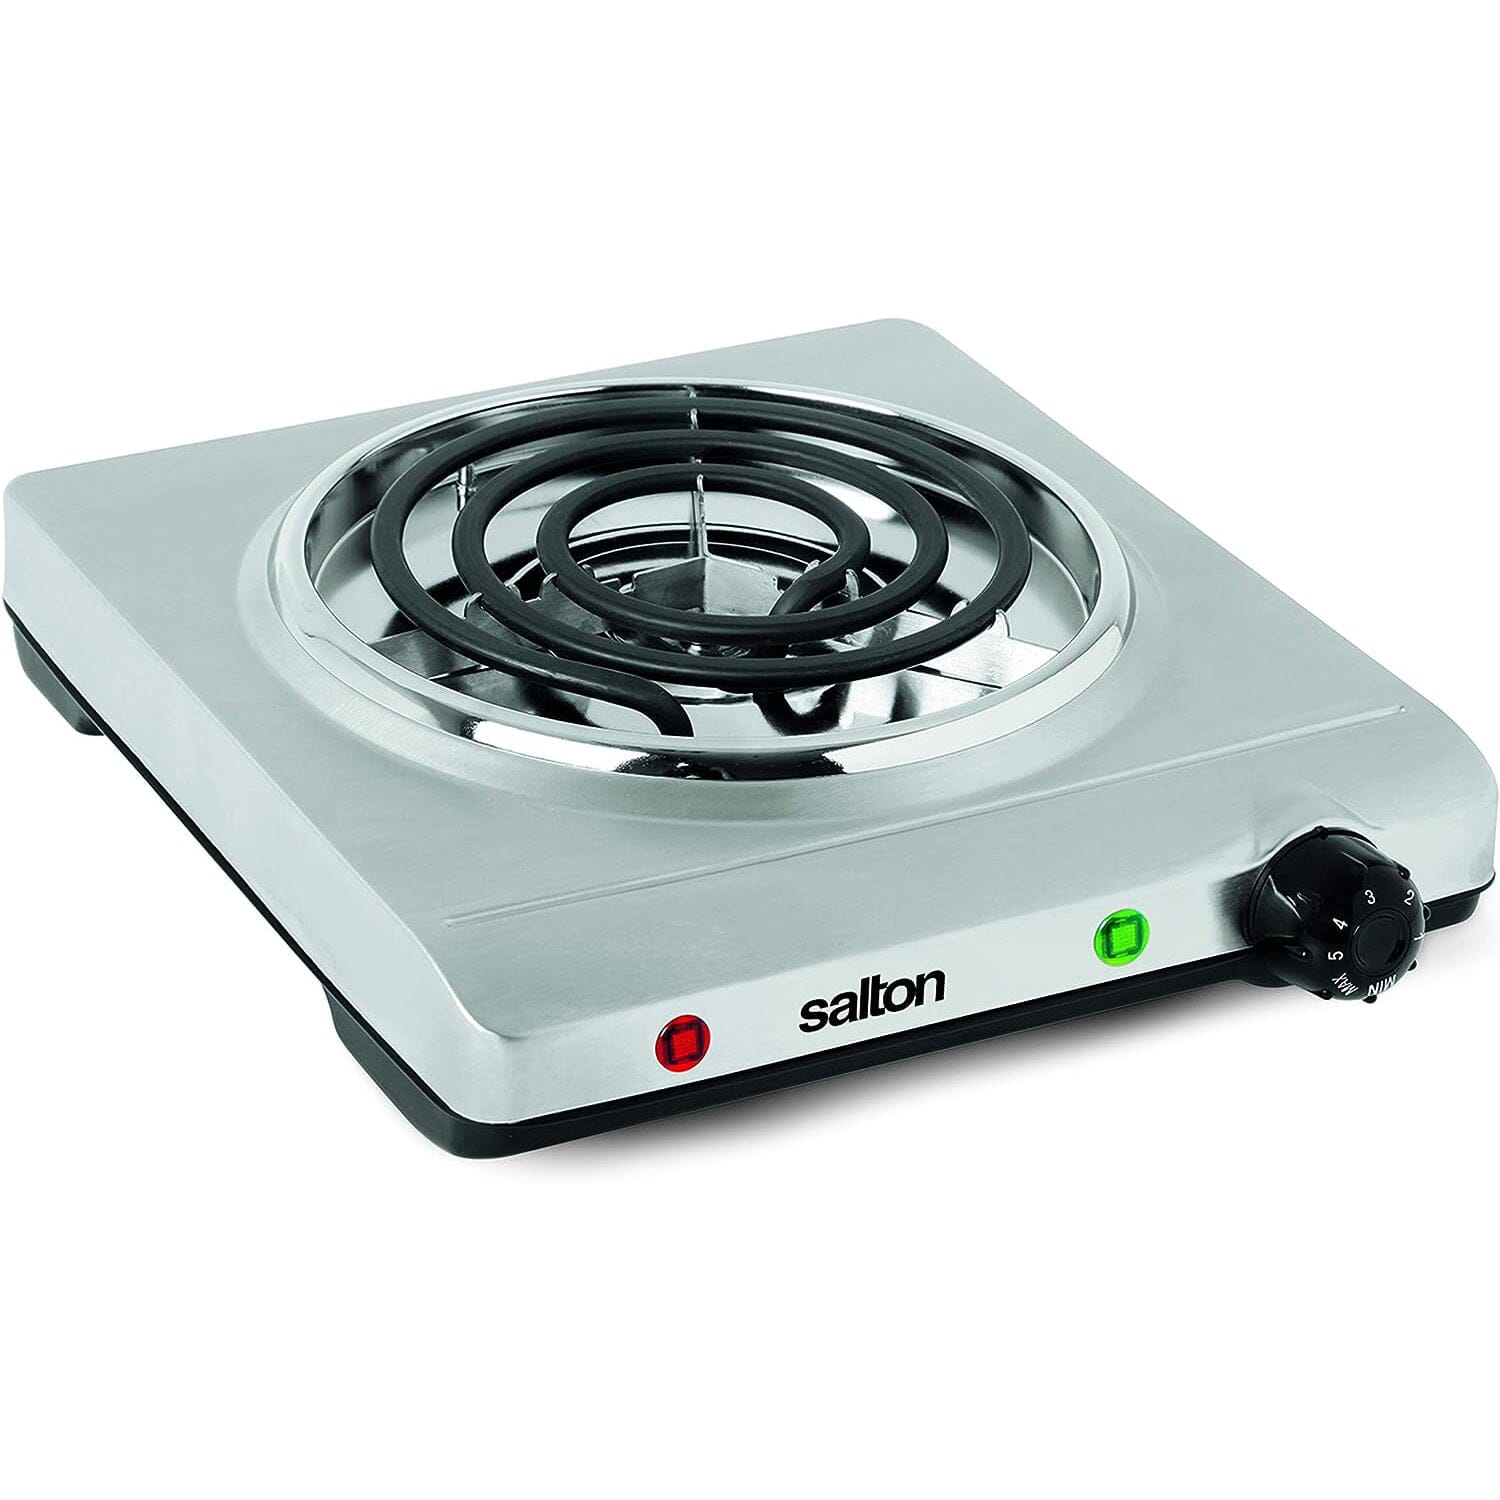 Salton Stainless Steel Portable Cooktop